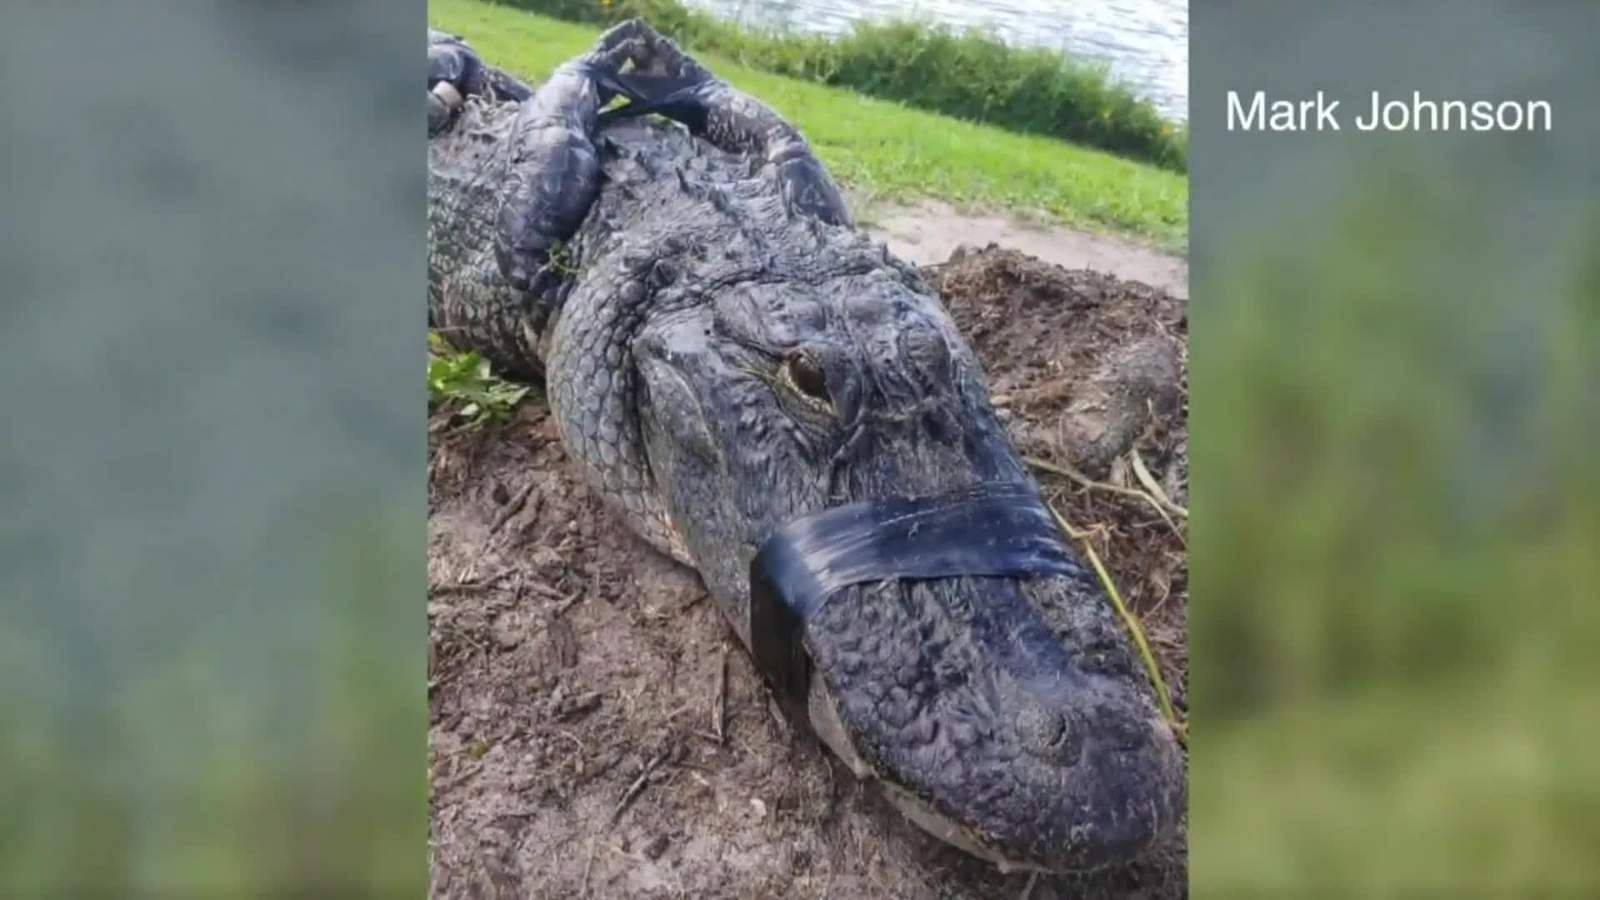 This simple move likely saved Florida man’s life after gator bite